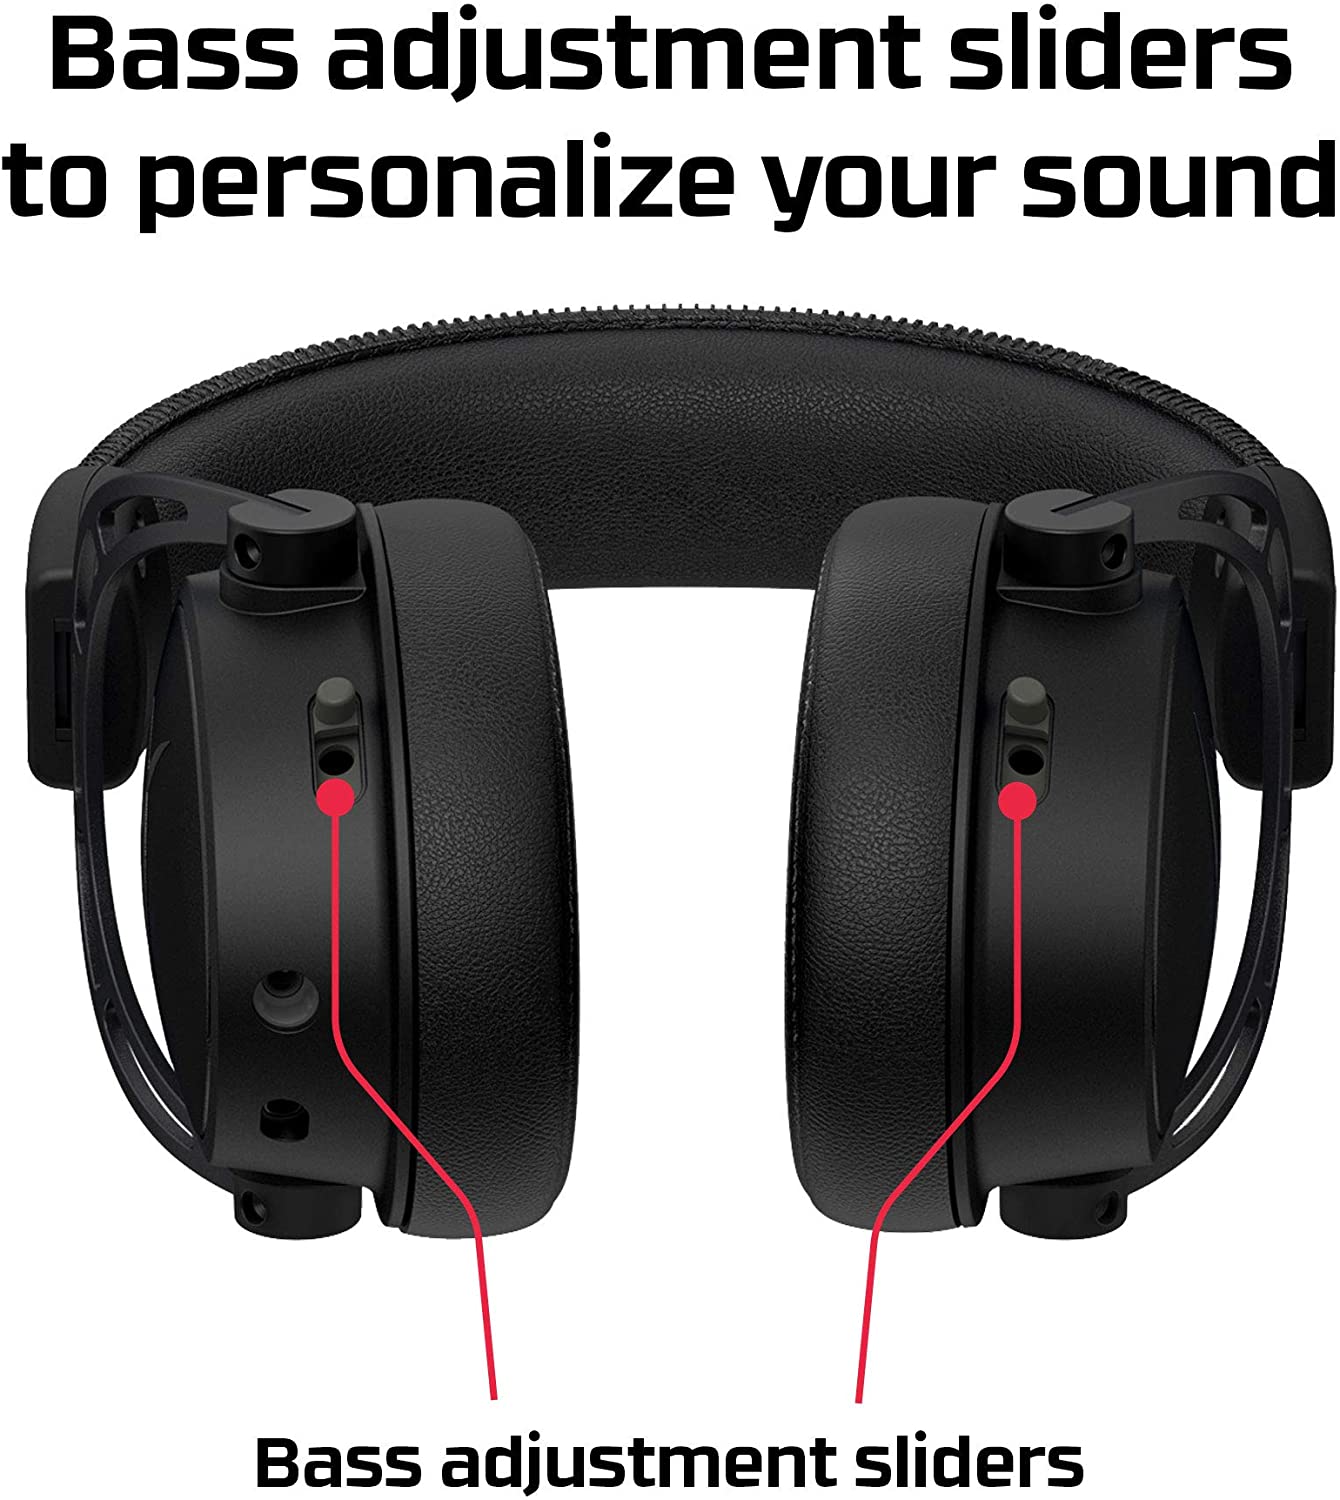 HyperX HX-HSCAS-BK/WW Cloud Alpha S - PC Gaming Headset, 7.1 Surround Sound, Noise Cancelling Microphone for PC, Xbox One and Mobile Devices